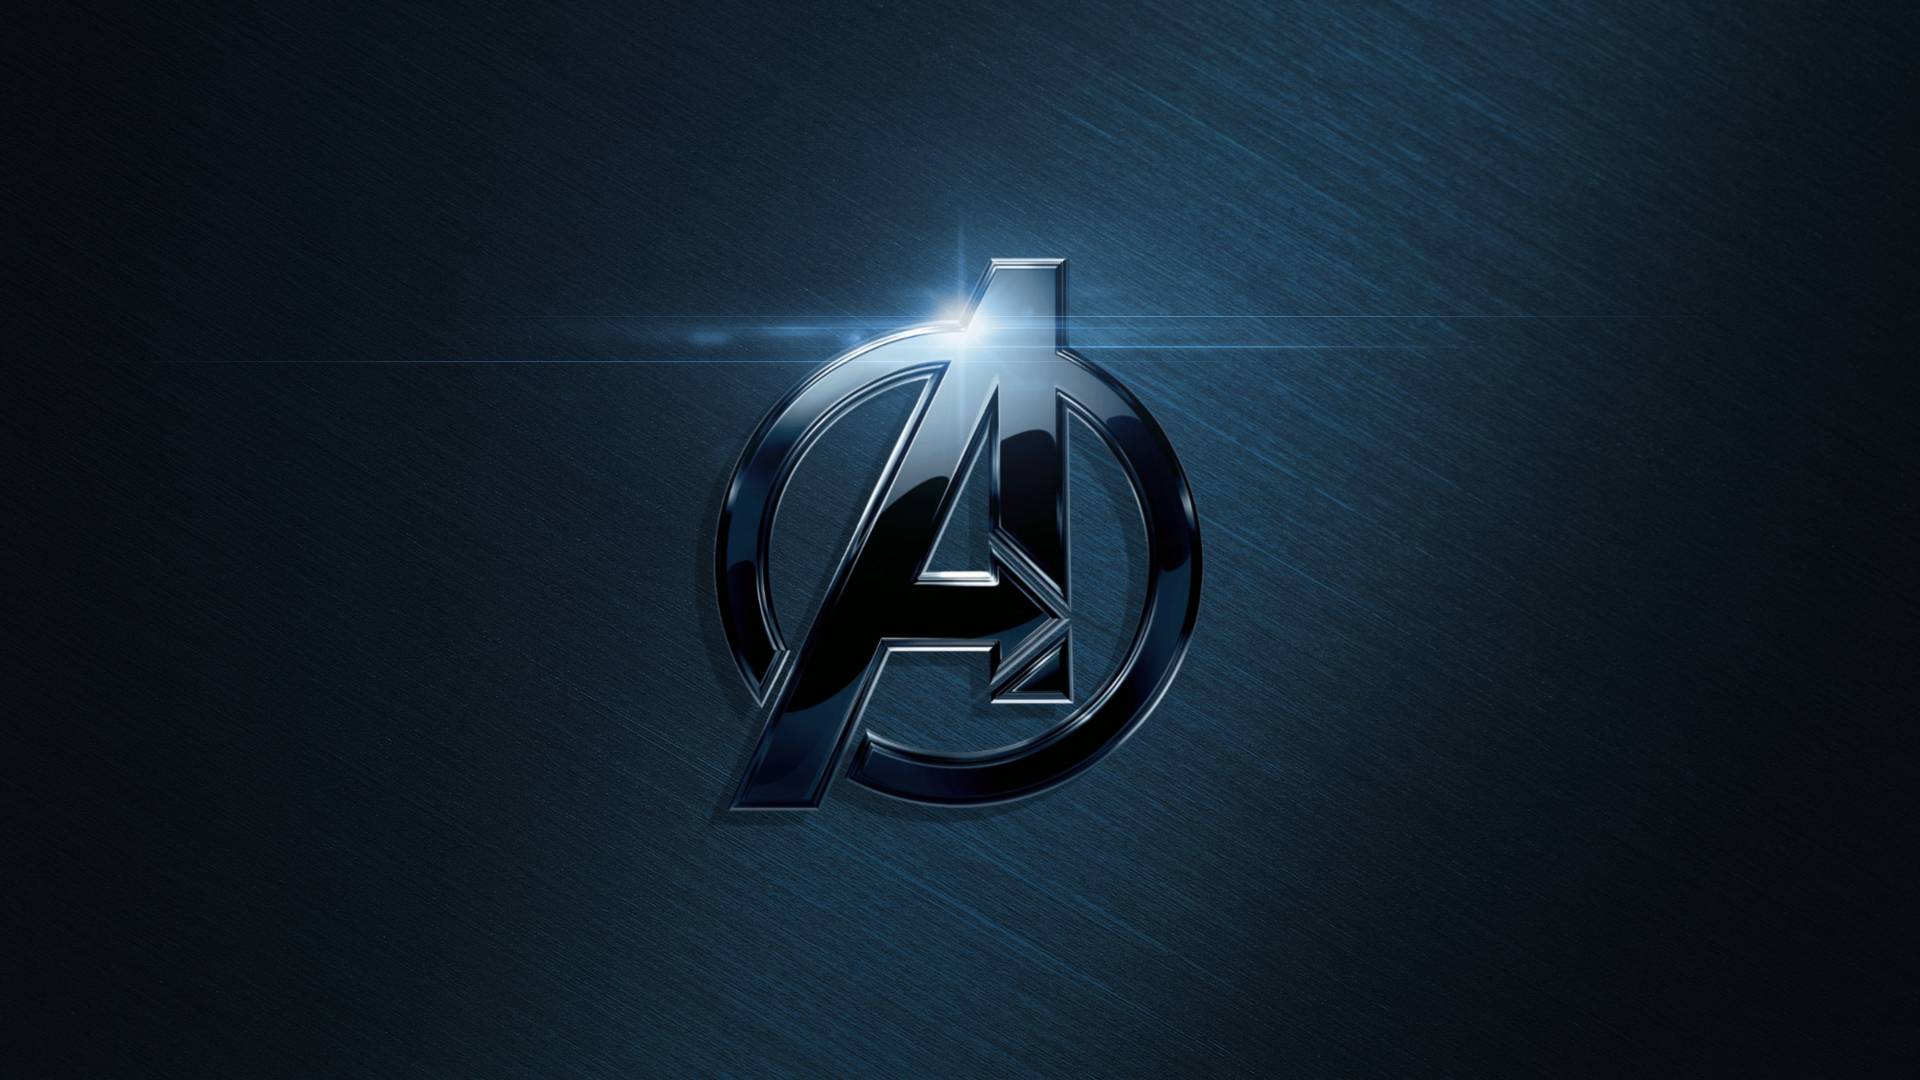 Get Your Super Hero Fix With These Awesome Wallpaper